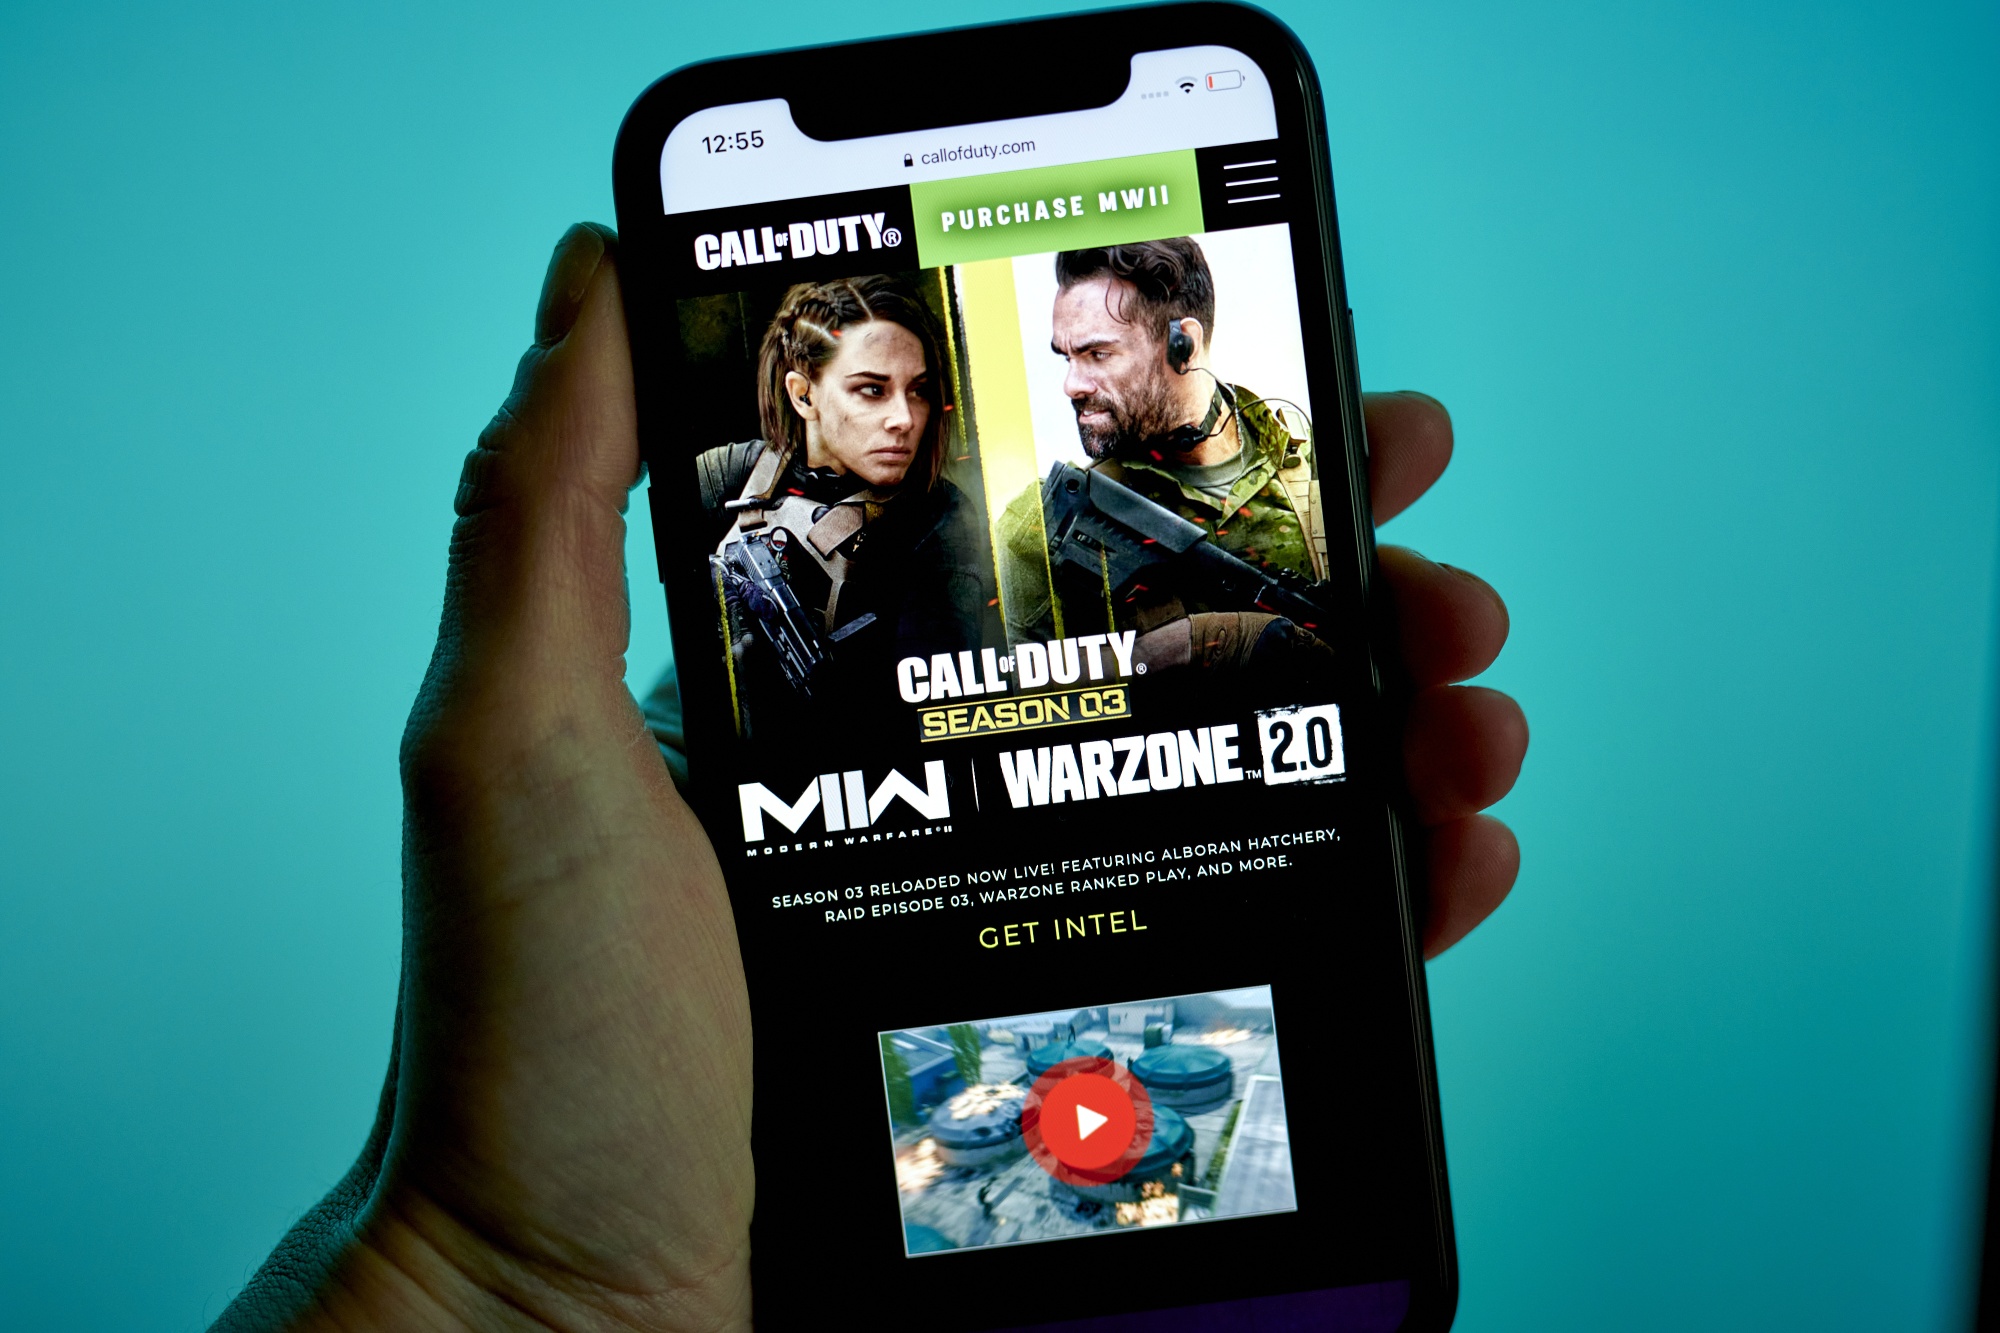 CMA Considers New Proposal From Microsoft to Finalize Activision Blizzard -  The Esports Advocate